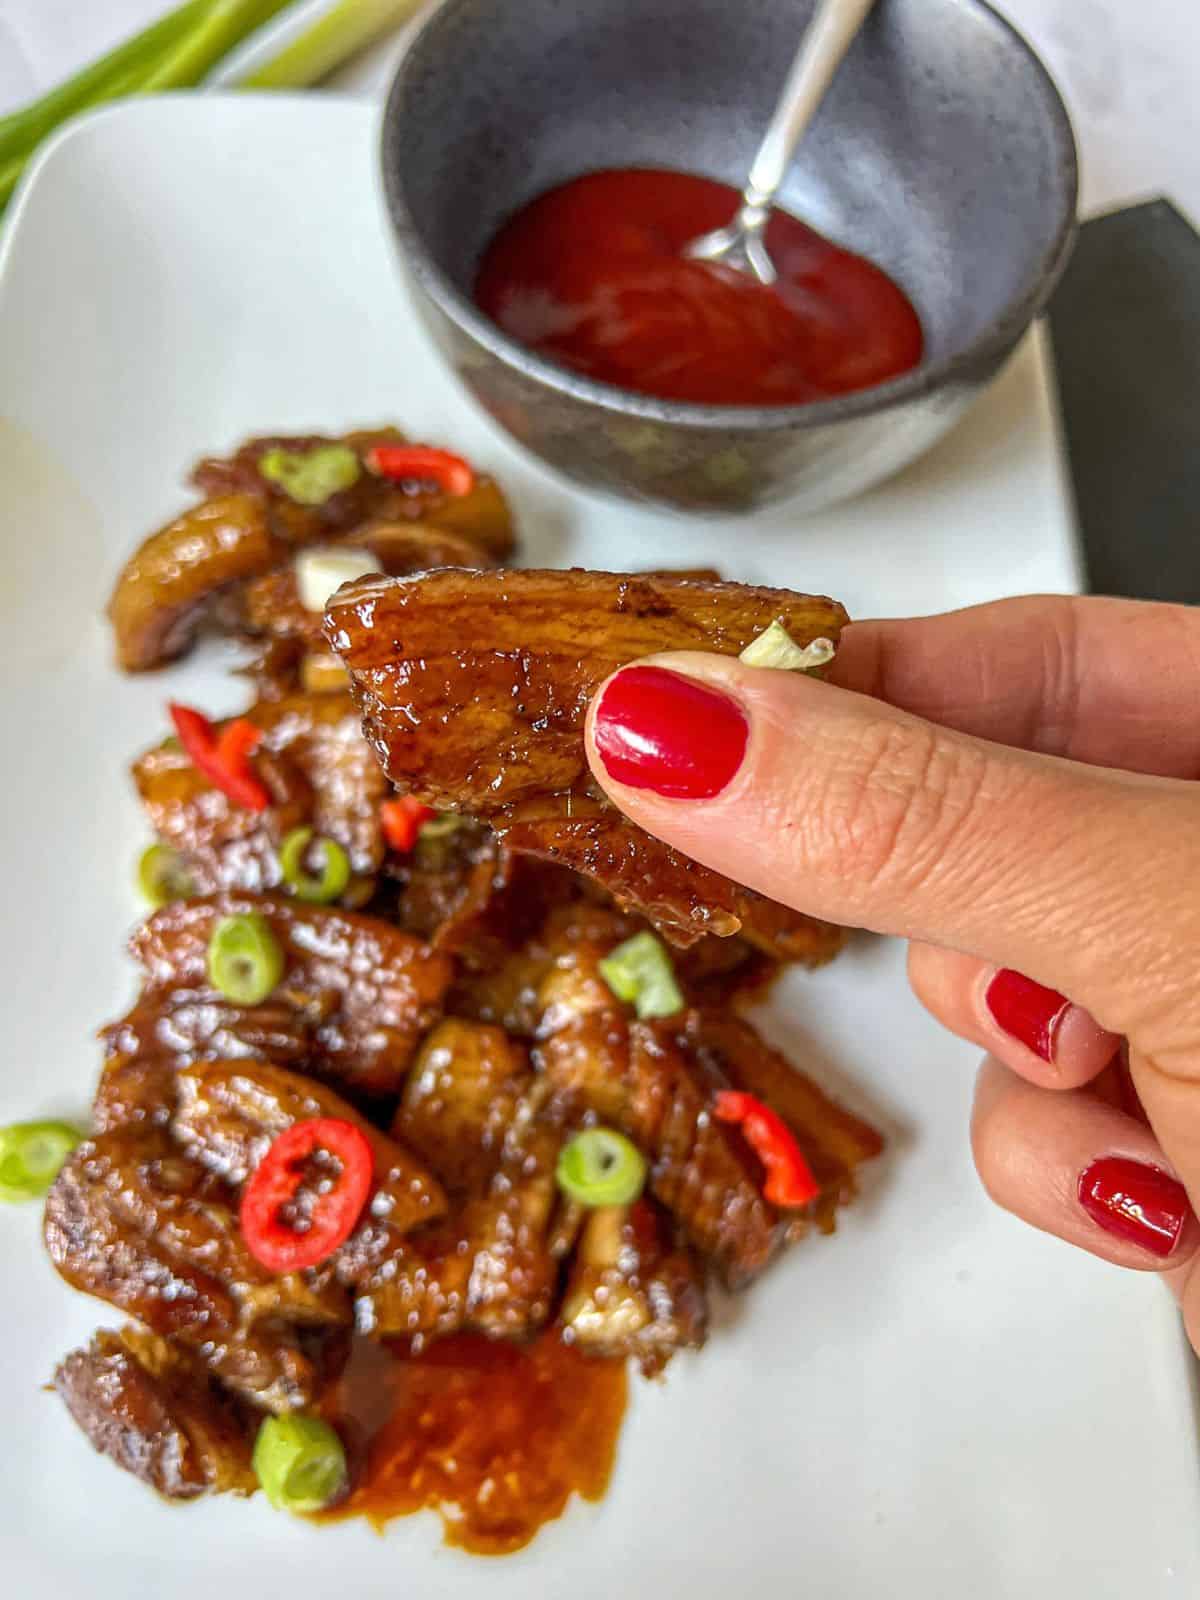 Someone holding up a cooked pork belly slice from a plate of pork belly garnished with chilli and spring onion.